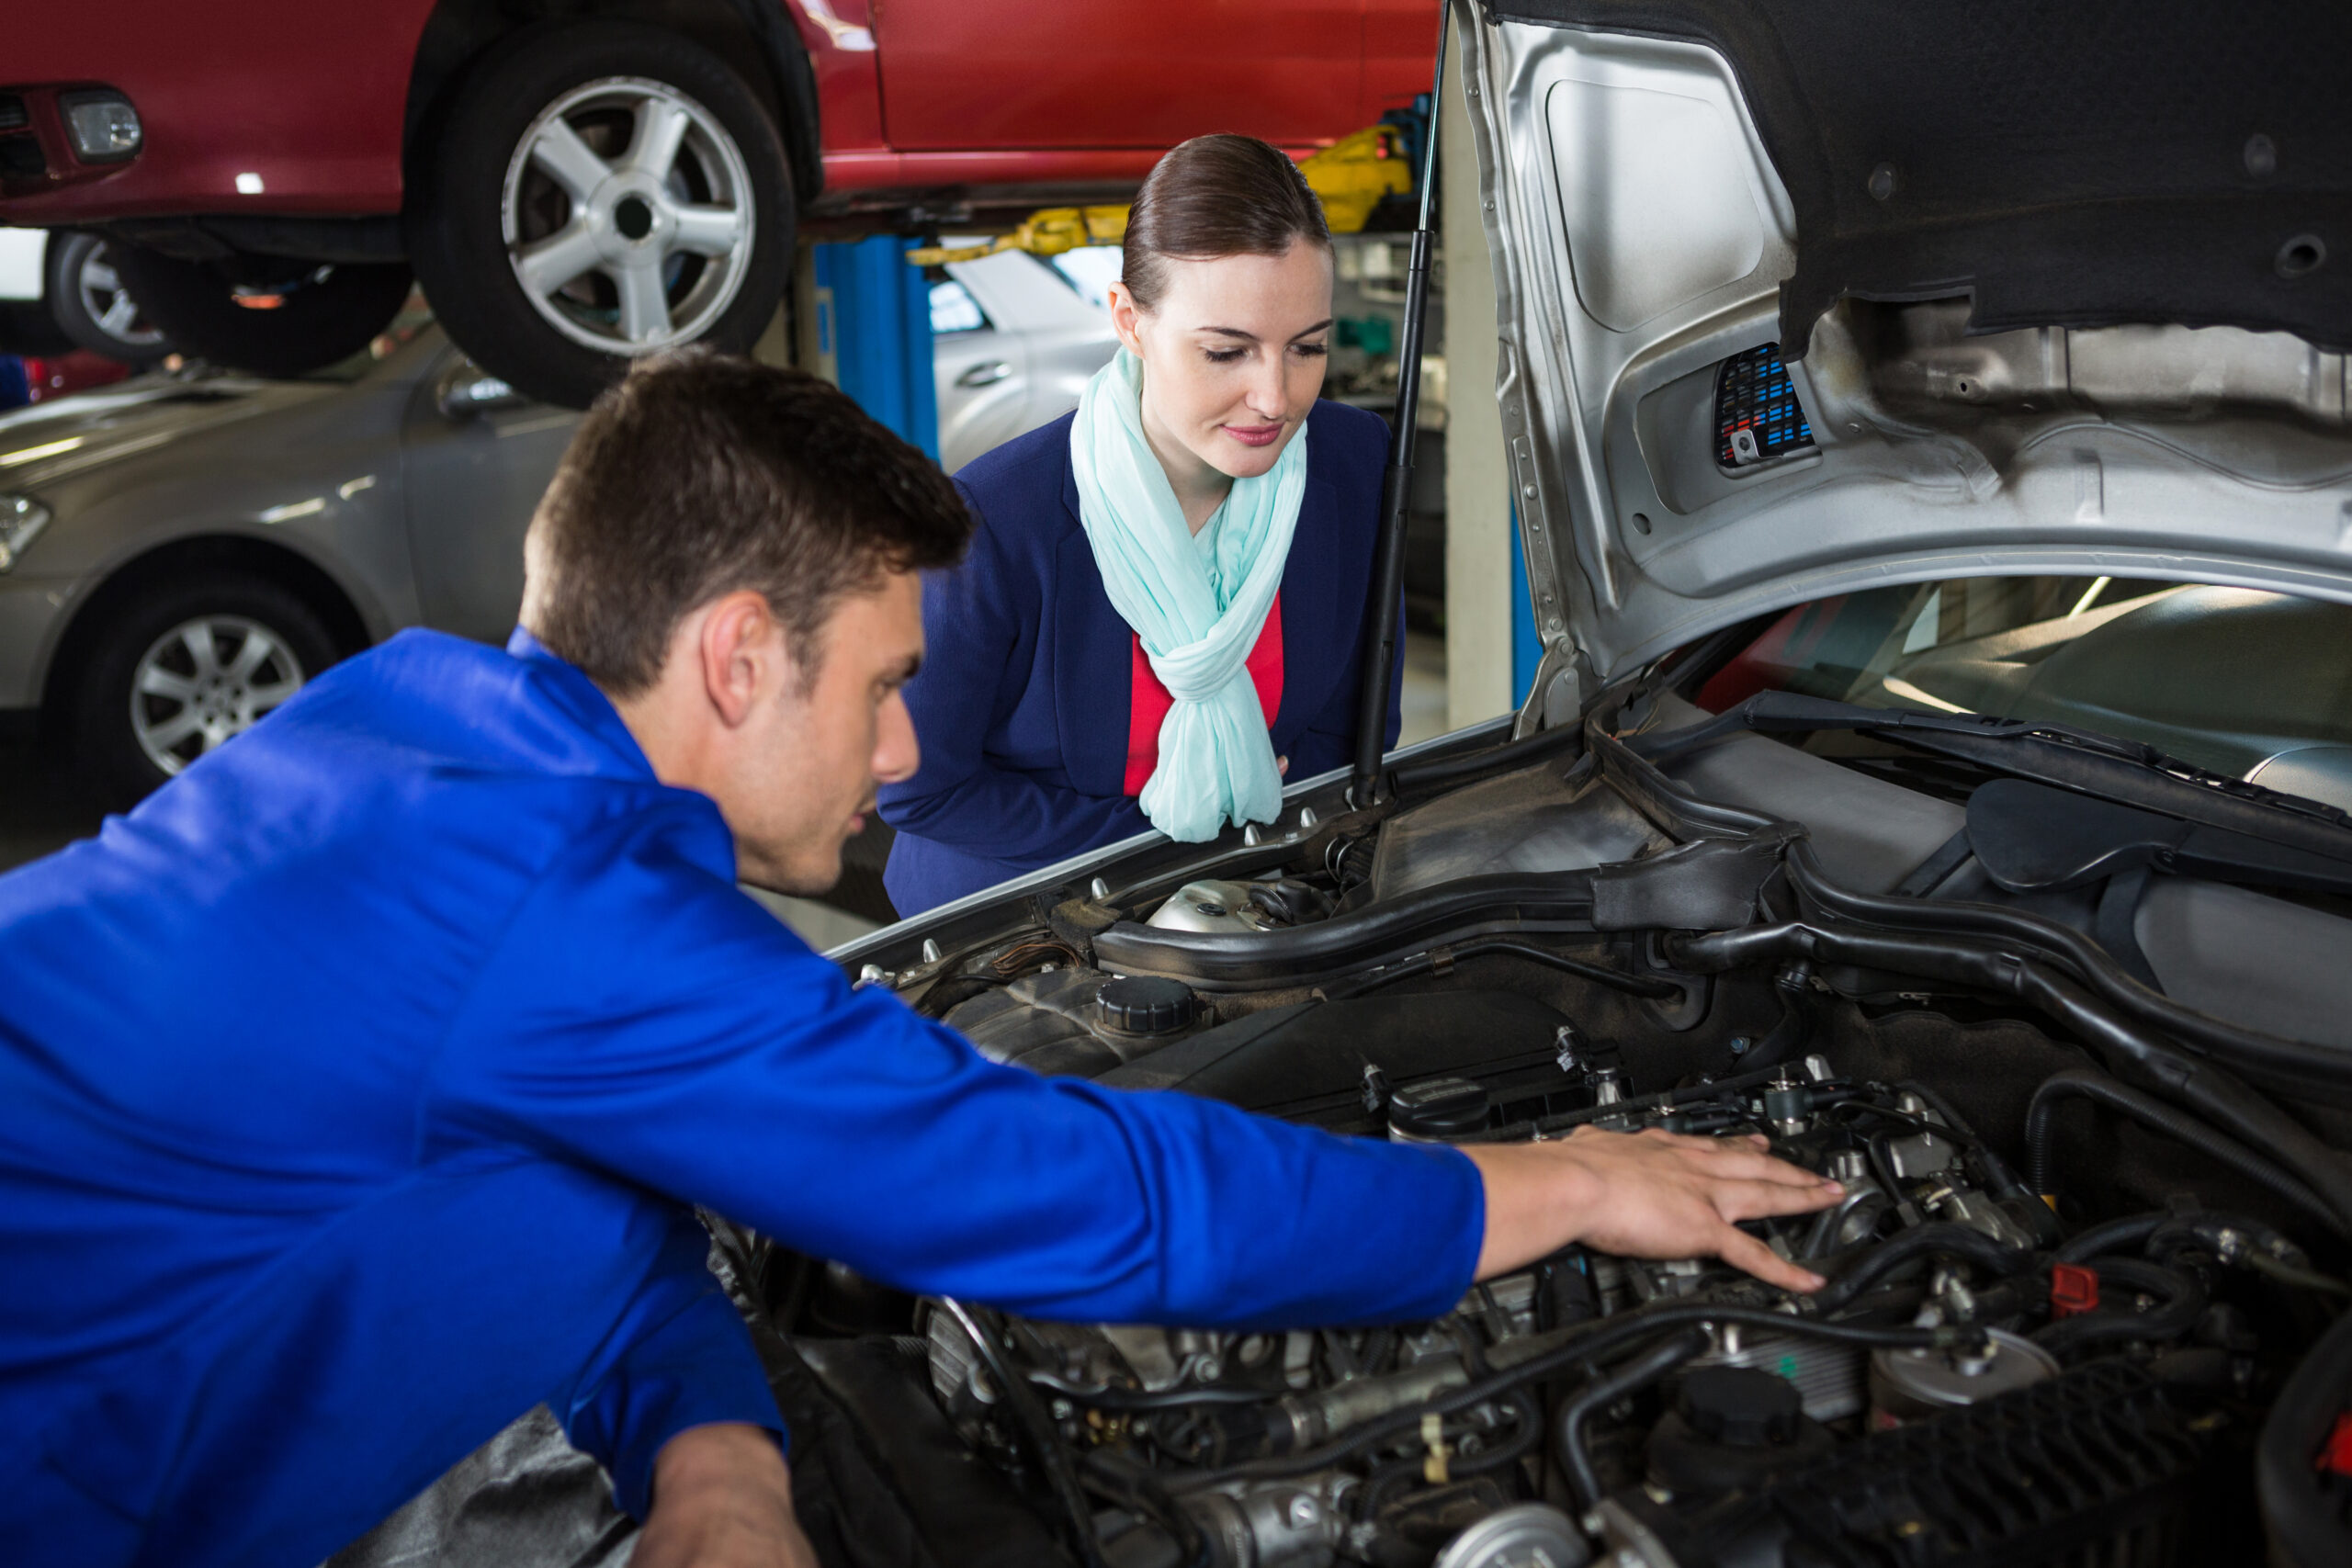 Mechanic showing customer the problem with car at repair garage